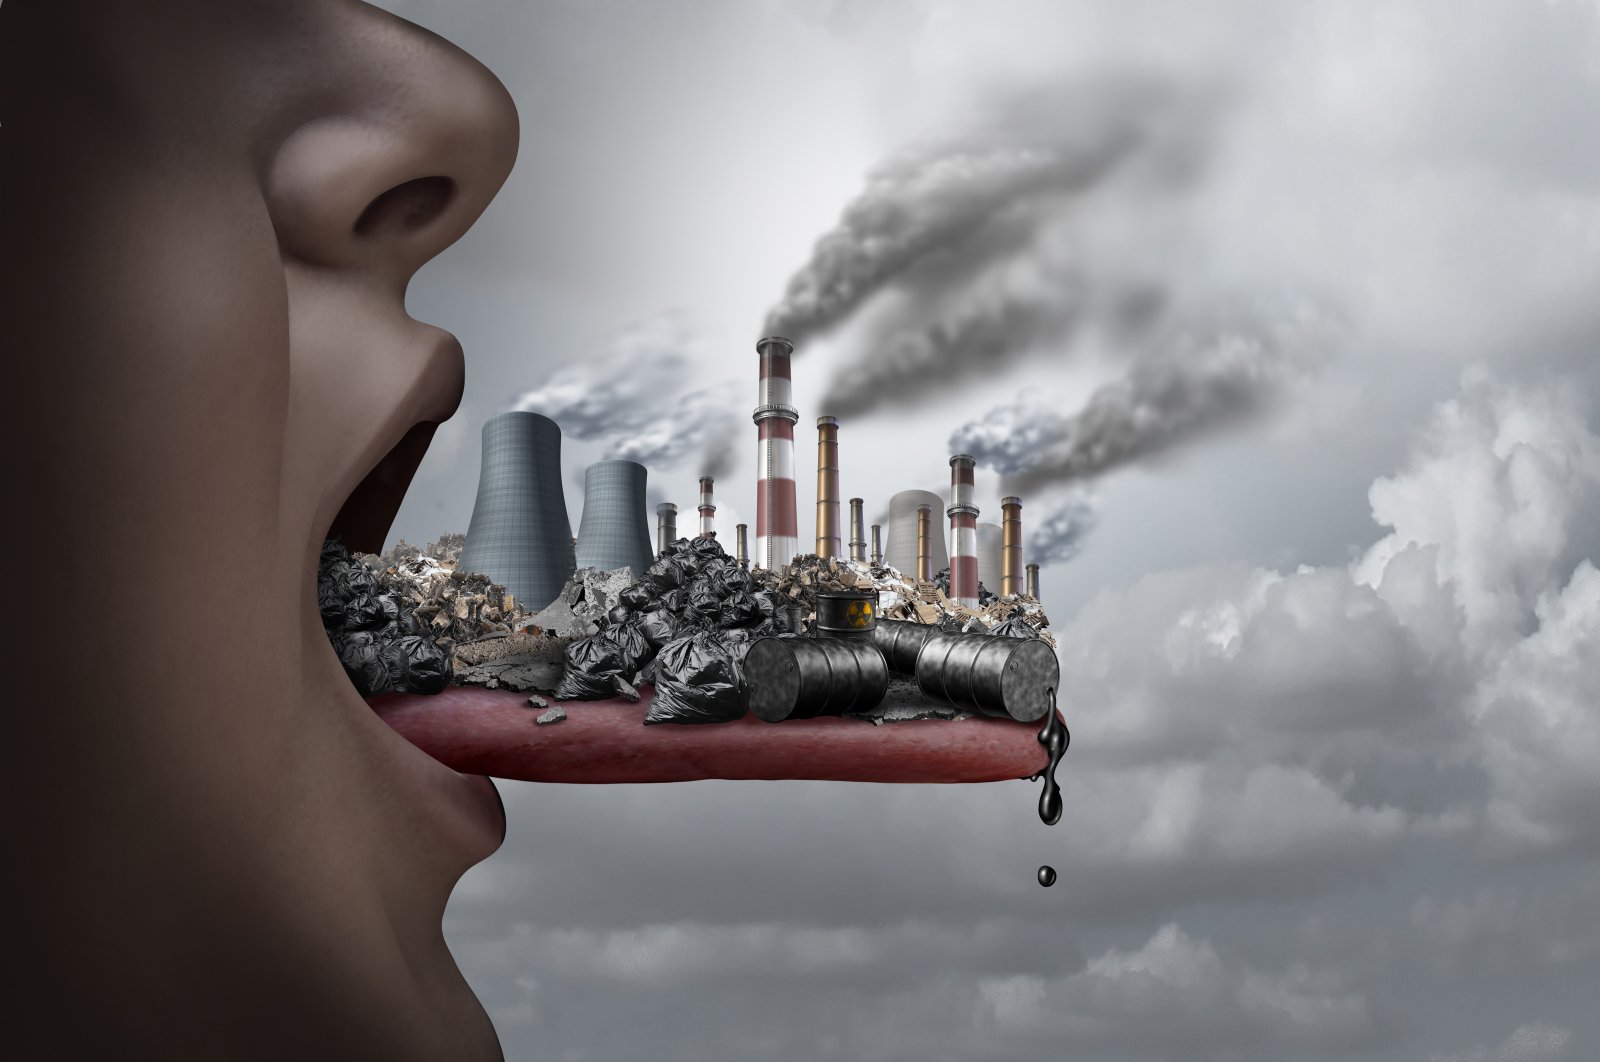 Lead pollution has been shown to cause a range of serious health problems, particularly relating to heart disease and the brain development of small children, resulting in leaded gasoline being banned worldwide. (Shutterstock Photo)